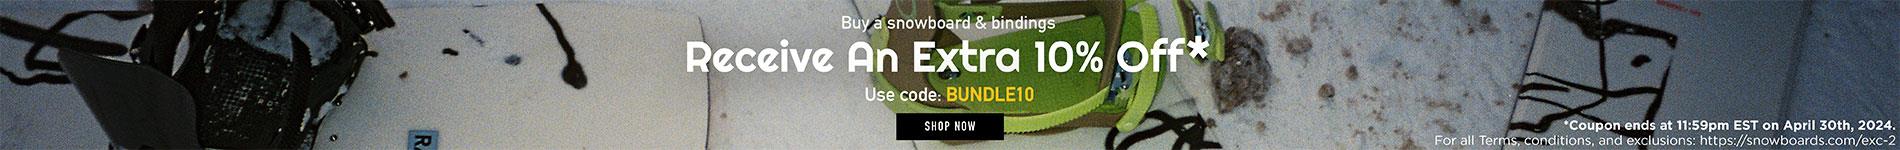 Womens Backcountry Snowboards